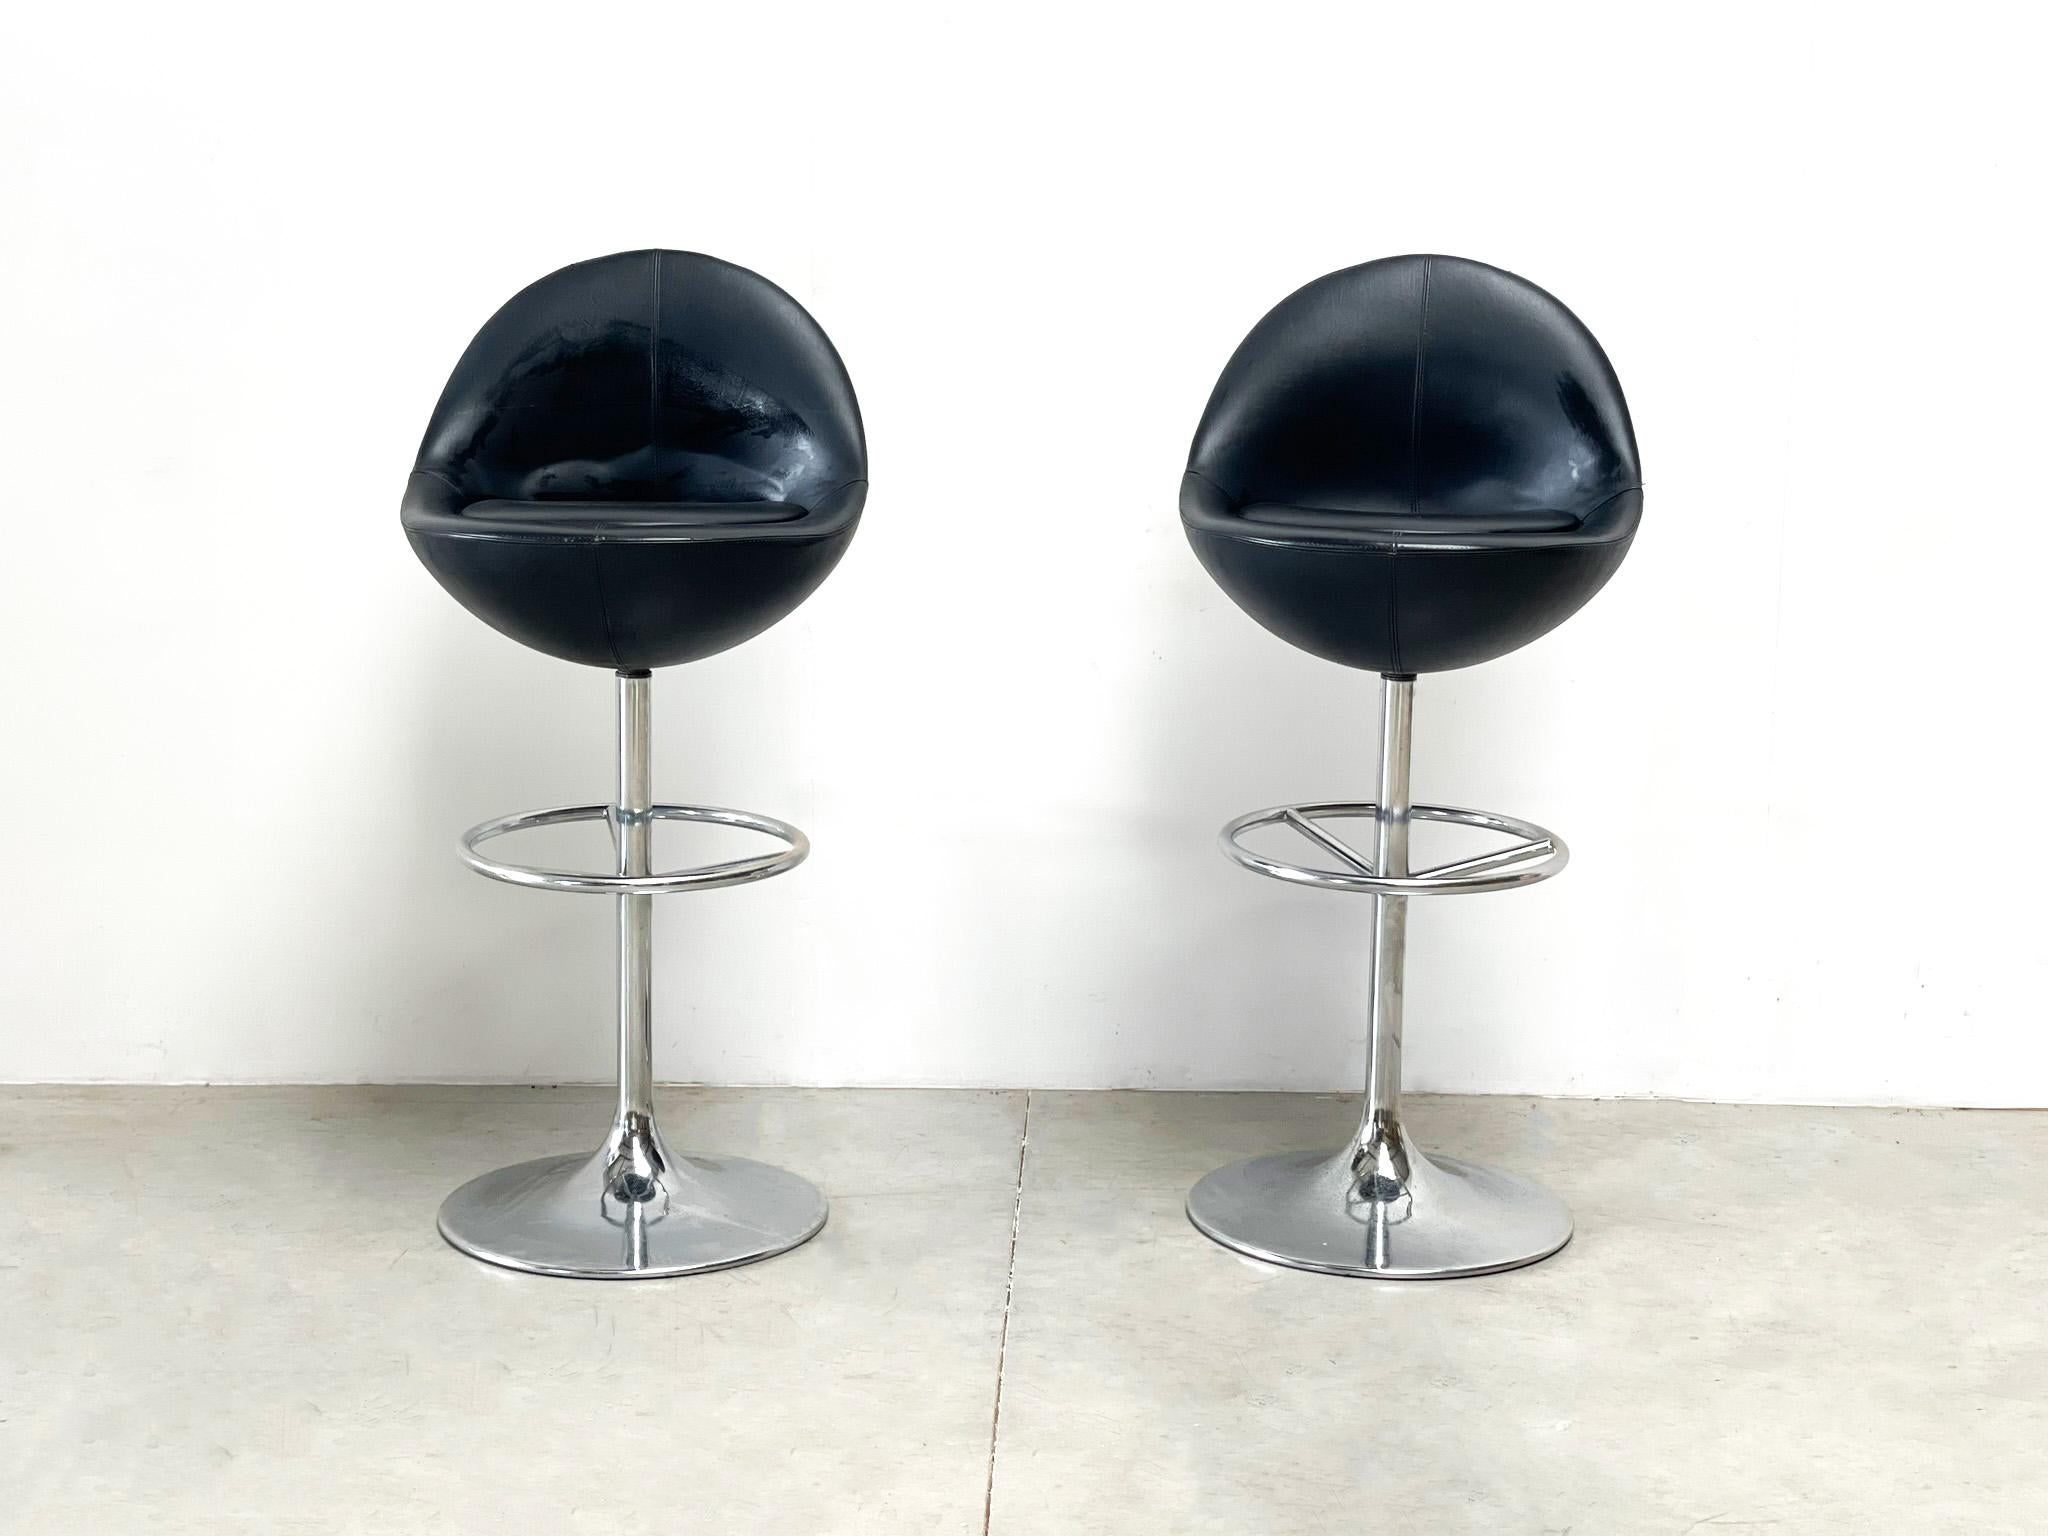 Nice vintage set of bar stools. These stools sral out 1 term! Comfort. The chairs are designed by Börje Johanson. He called these chairs the 